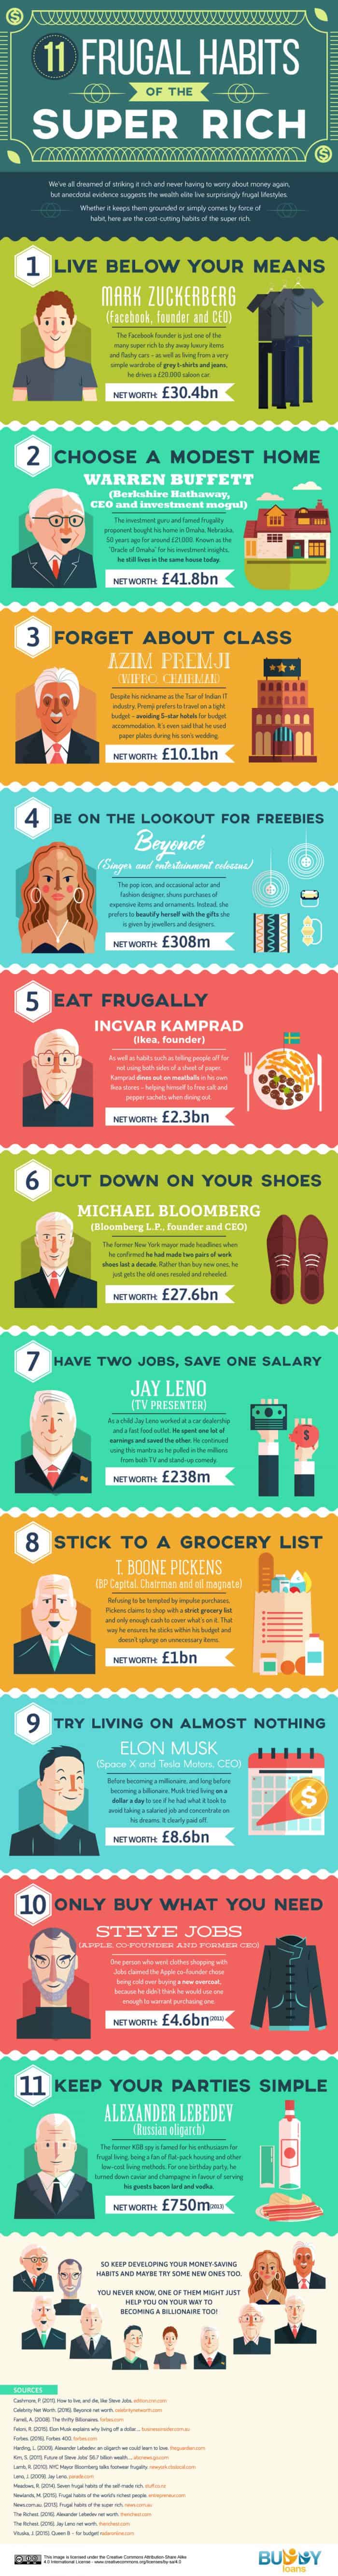 11 Frugal Habits of the Super Rich